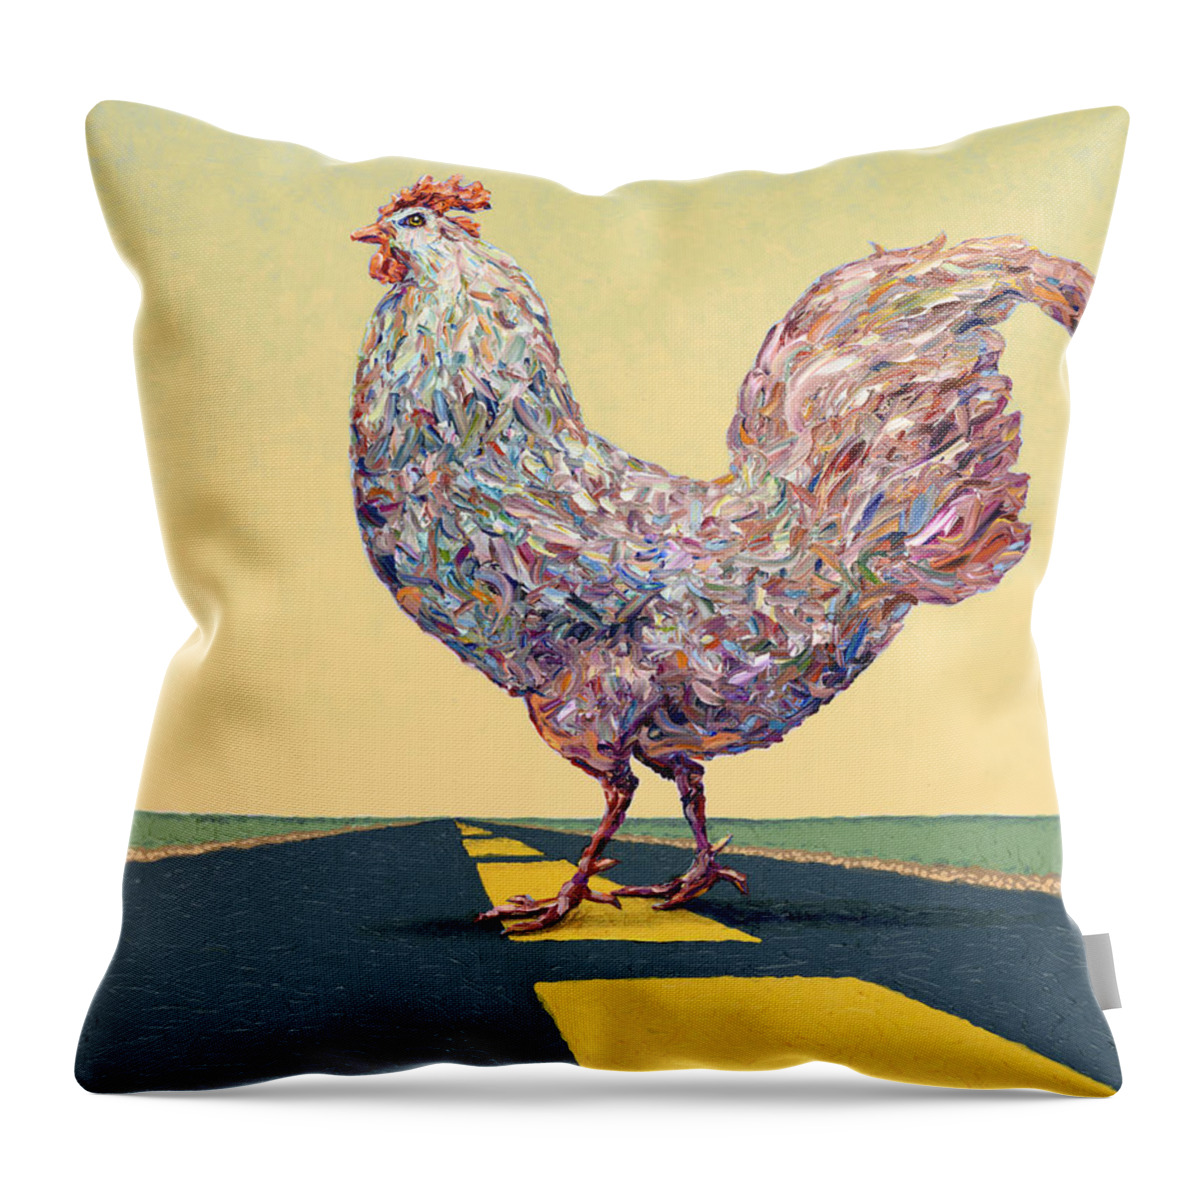 Chicken Throw Pillow featuring the painting Crossing Chicken by James W Johnson